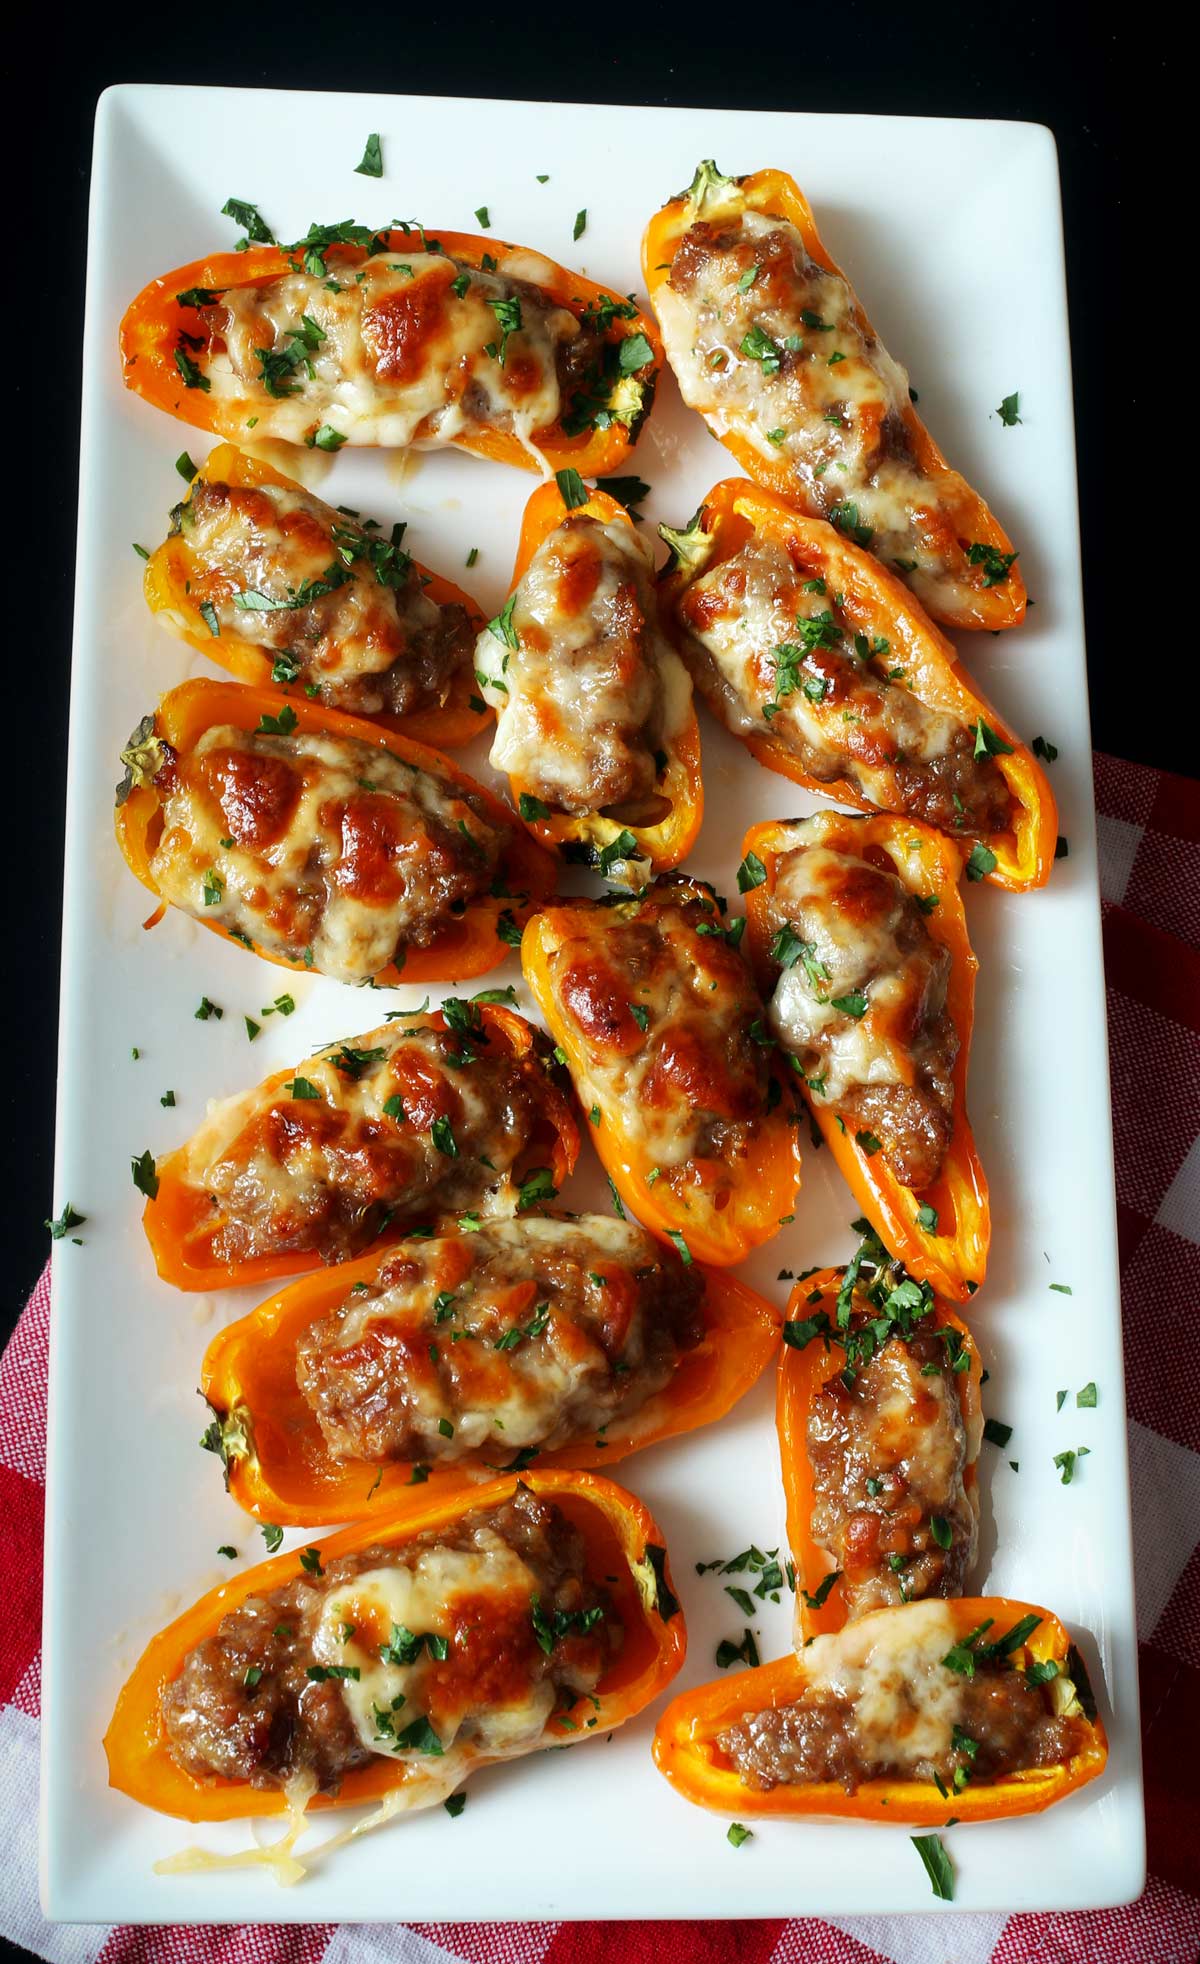 platter of stuffed mini peppers loaded with sausage and topped with melted cheese.